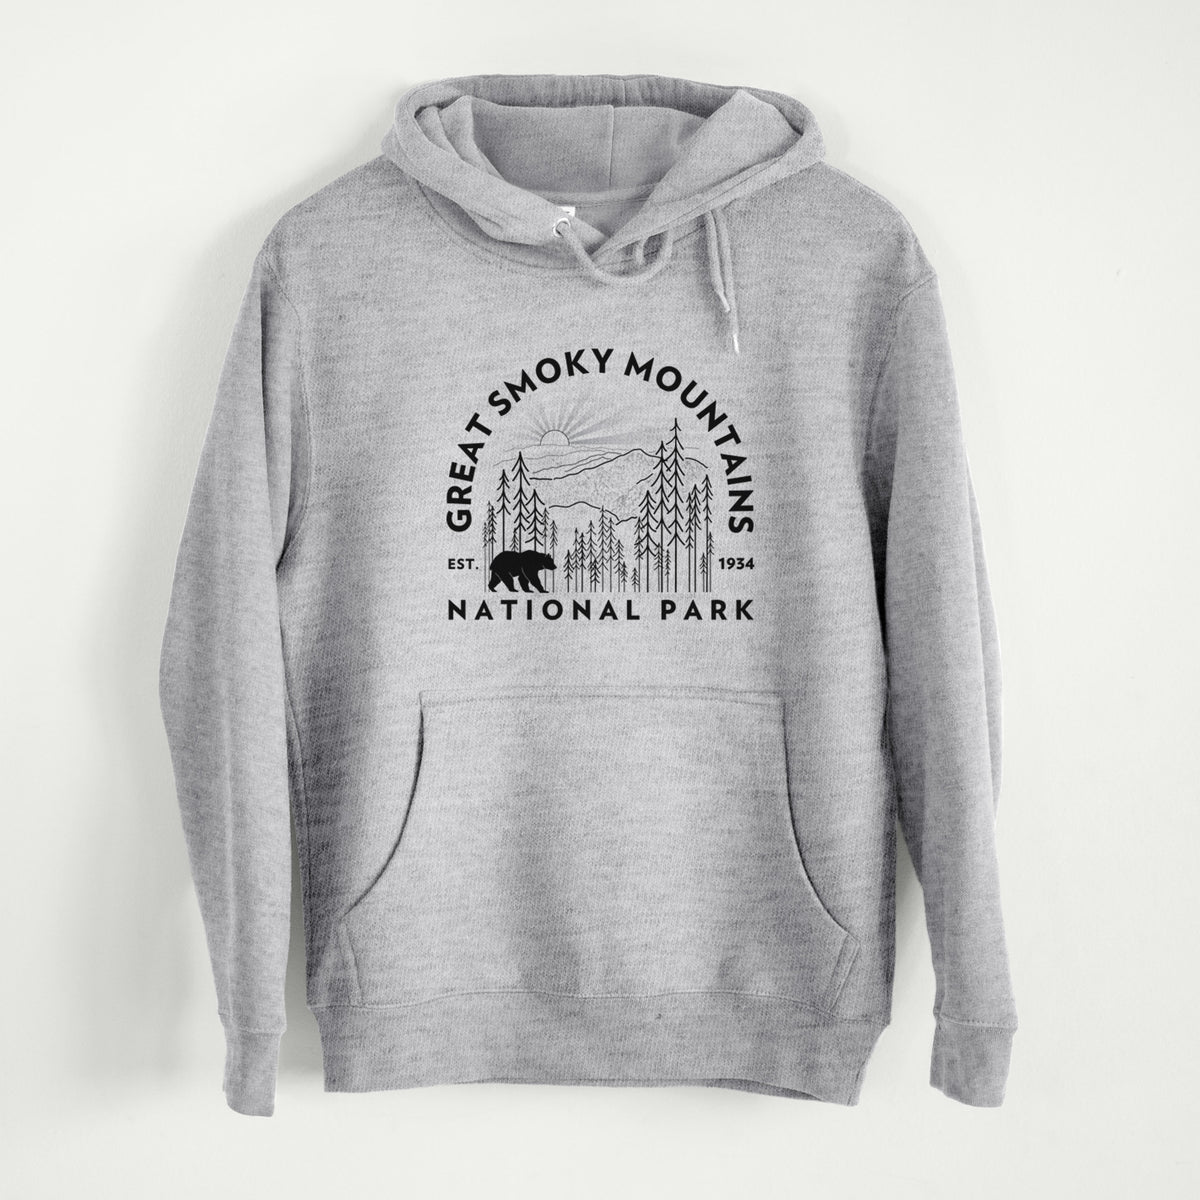 Great Smoky Mountains National Park  - Mid-Weight Unisex Premium Blend Hoodie